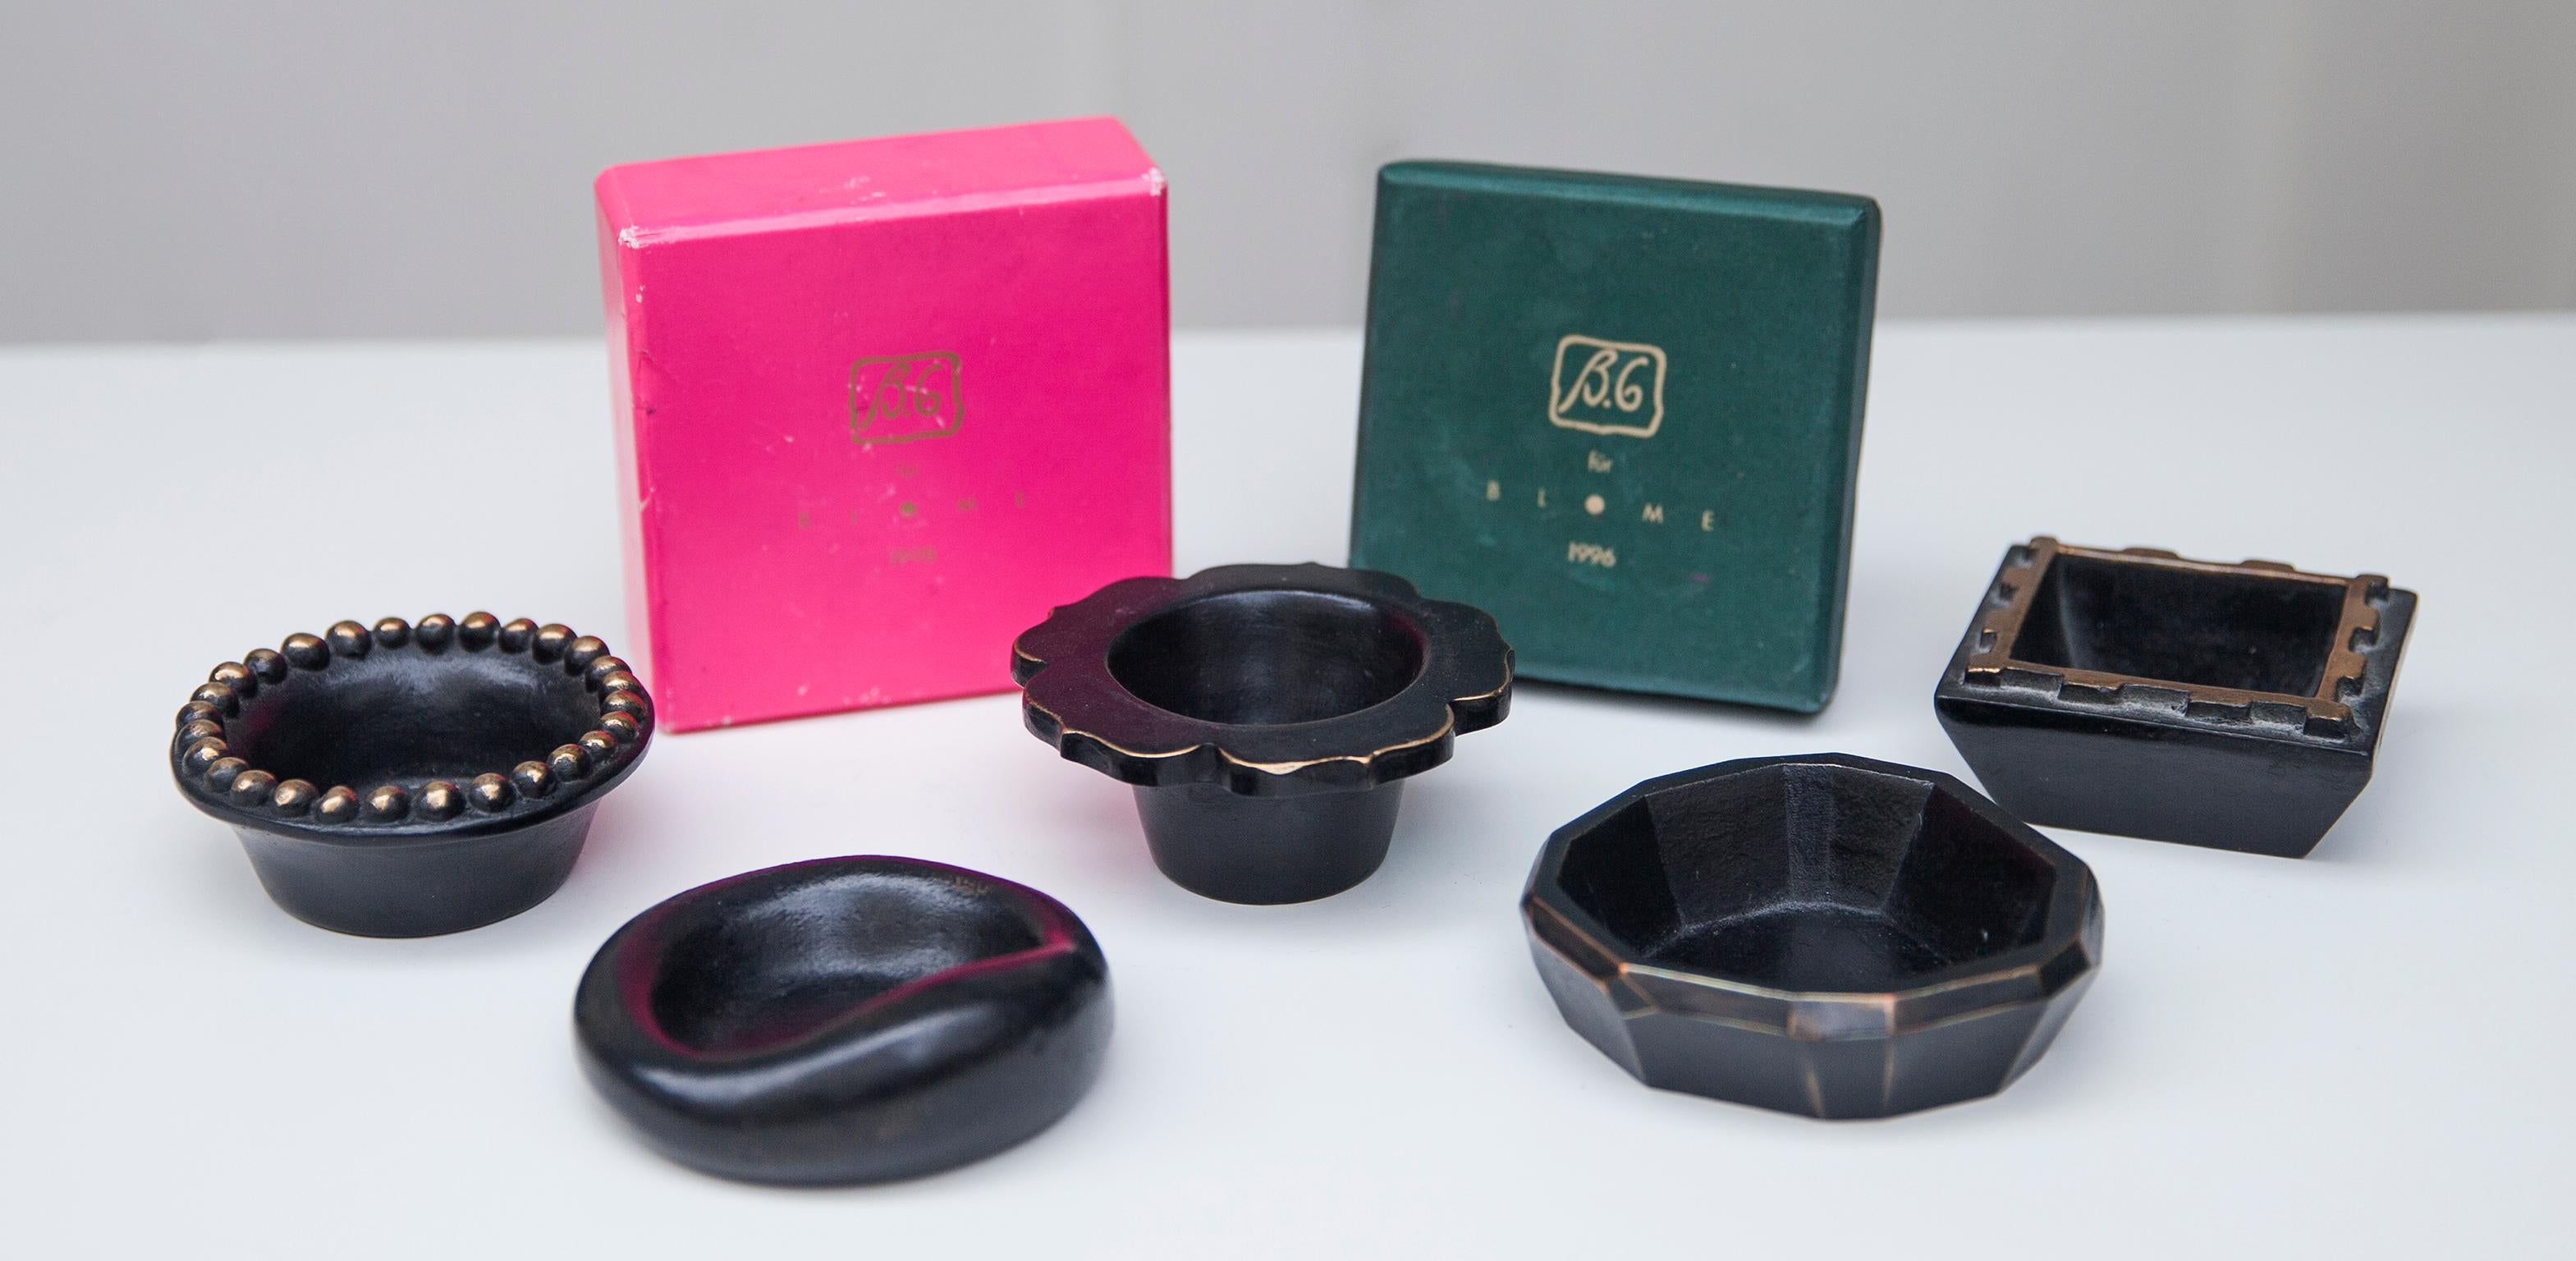 The French designers Elisabeth Garouste et Mattia Bonetti designed these bowls along with seven other small cast bronze objects for Herbert Blome between 1996-2001 signed B.G. BLOME B.G.H. EDITIONS/BLOME. Two original boxes are included.